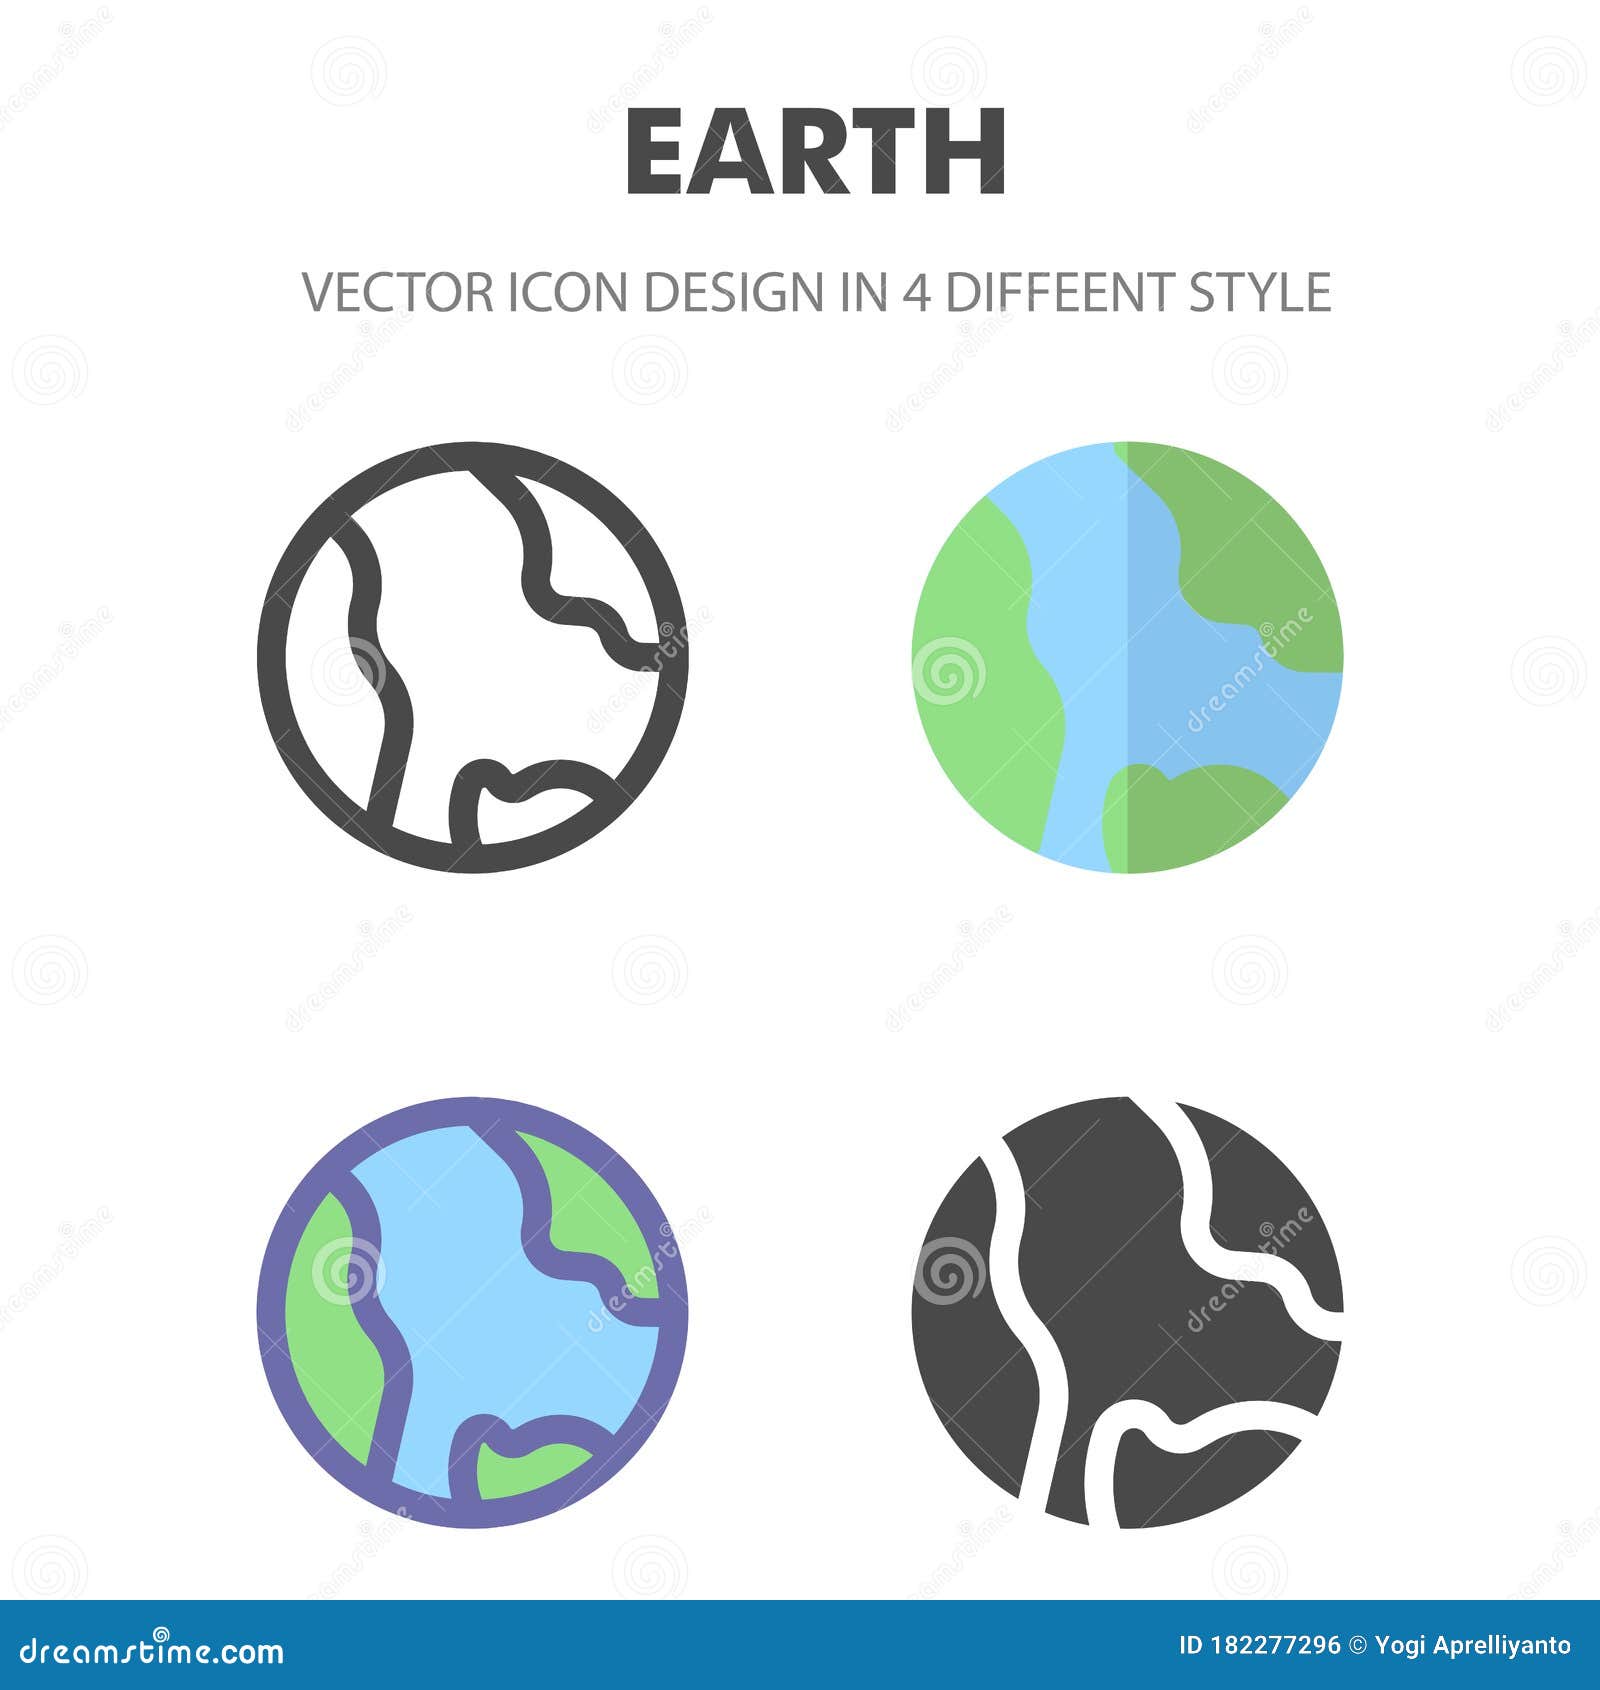 vector graphics app android